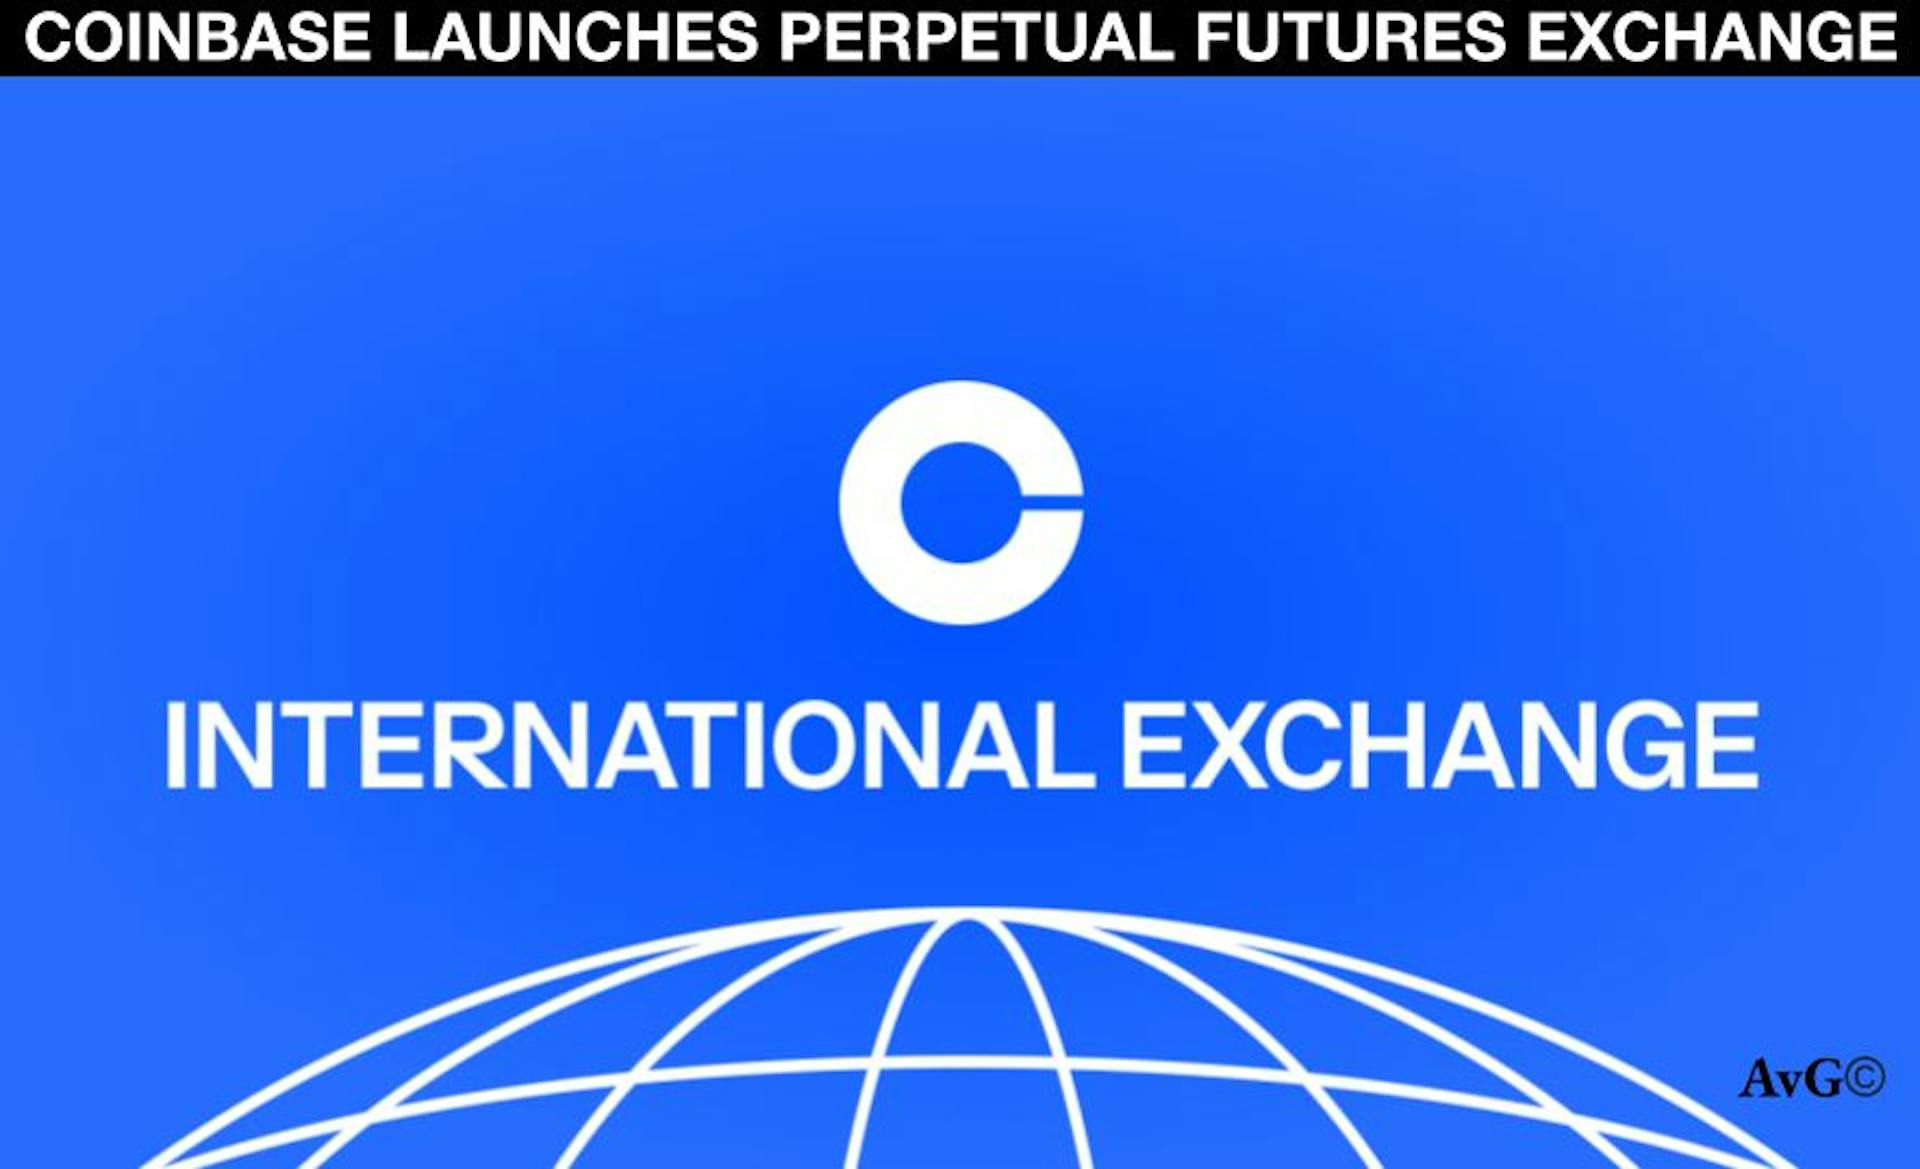 Coinbase launches perpetual futures exchange called Coinbase International Exchange